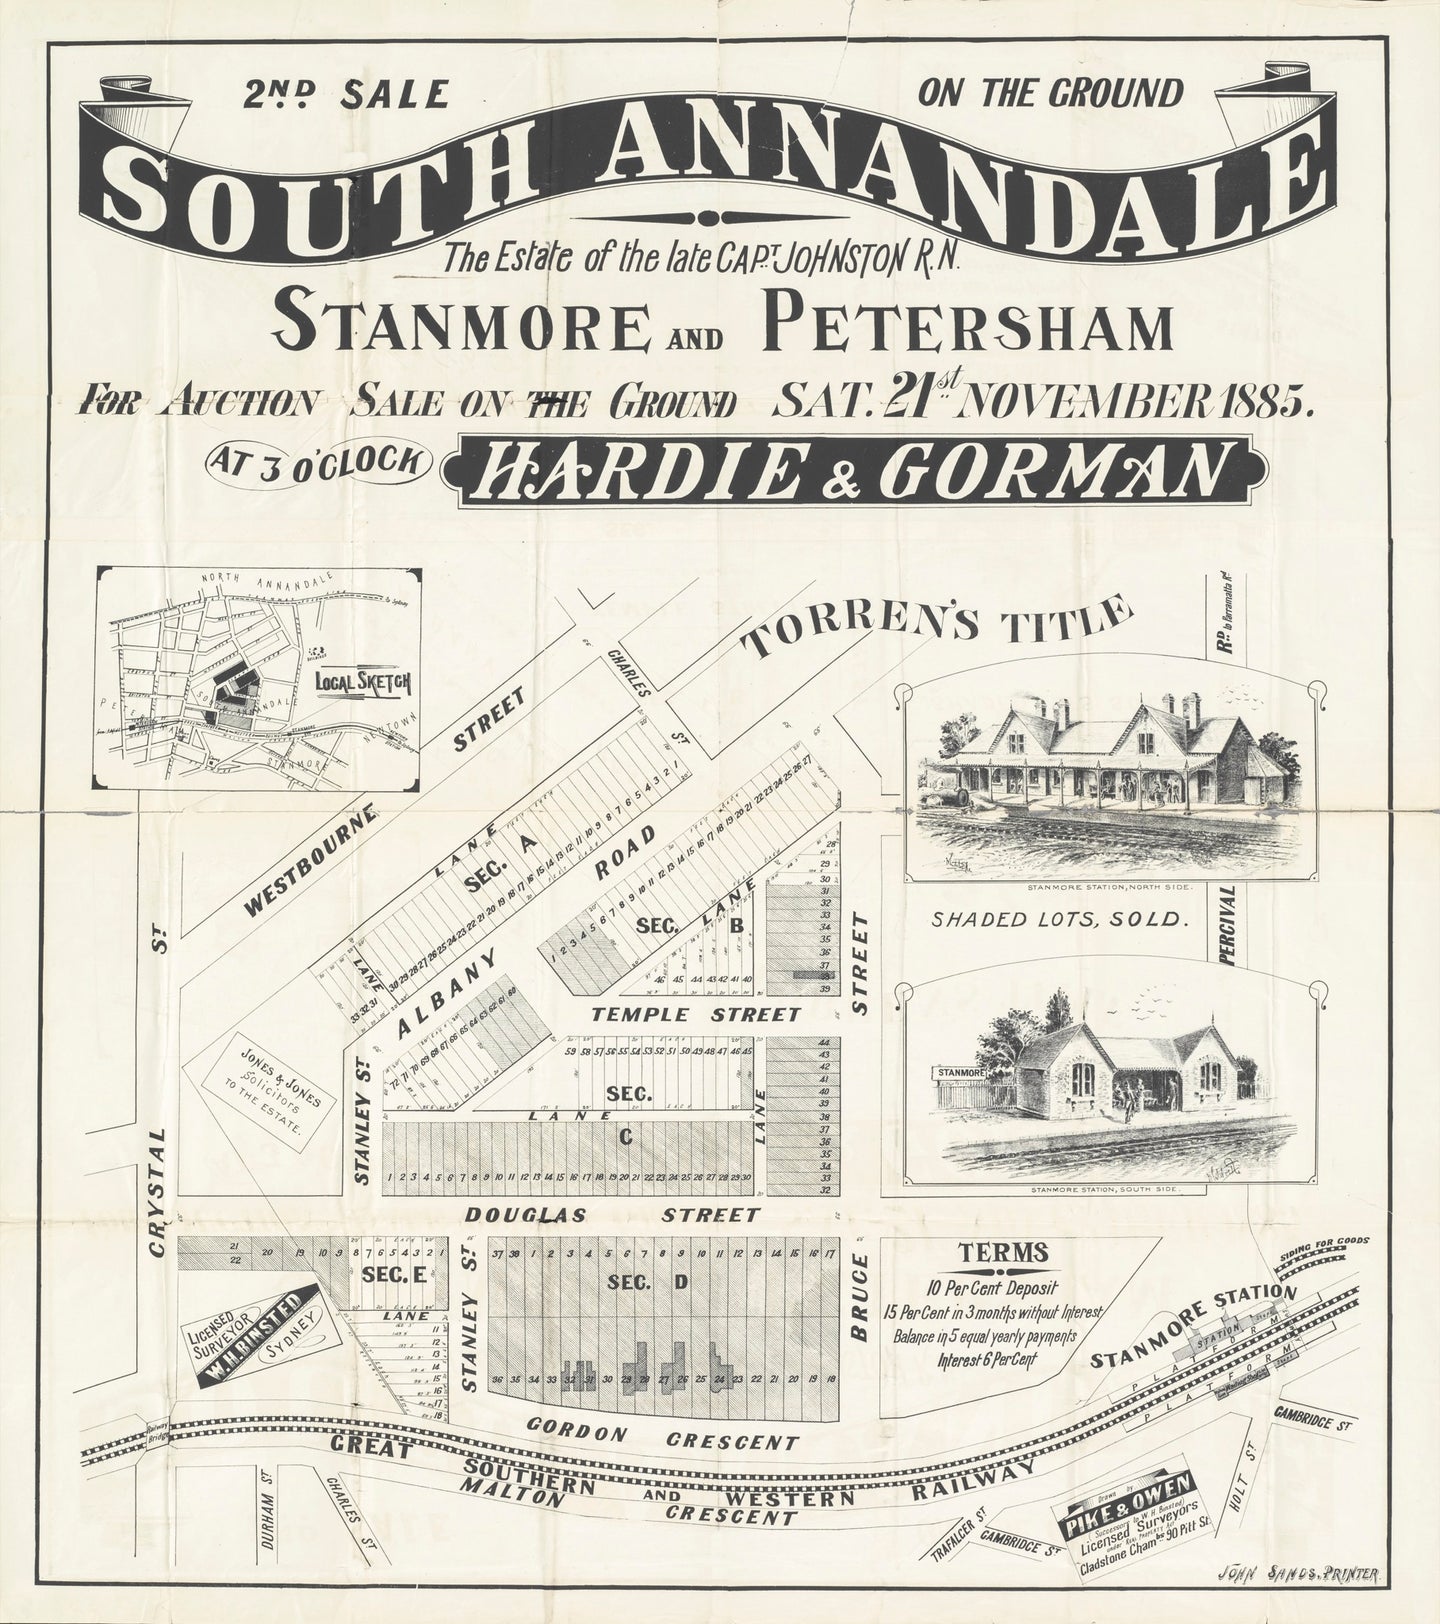 South Annandale - The Estate of the late Captn Johnston R.N. - Stanmore and Petersham